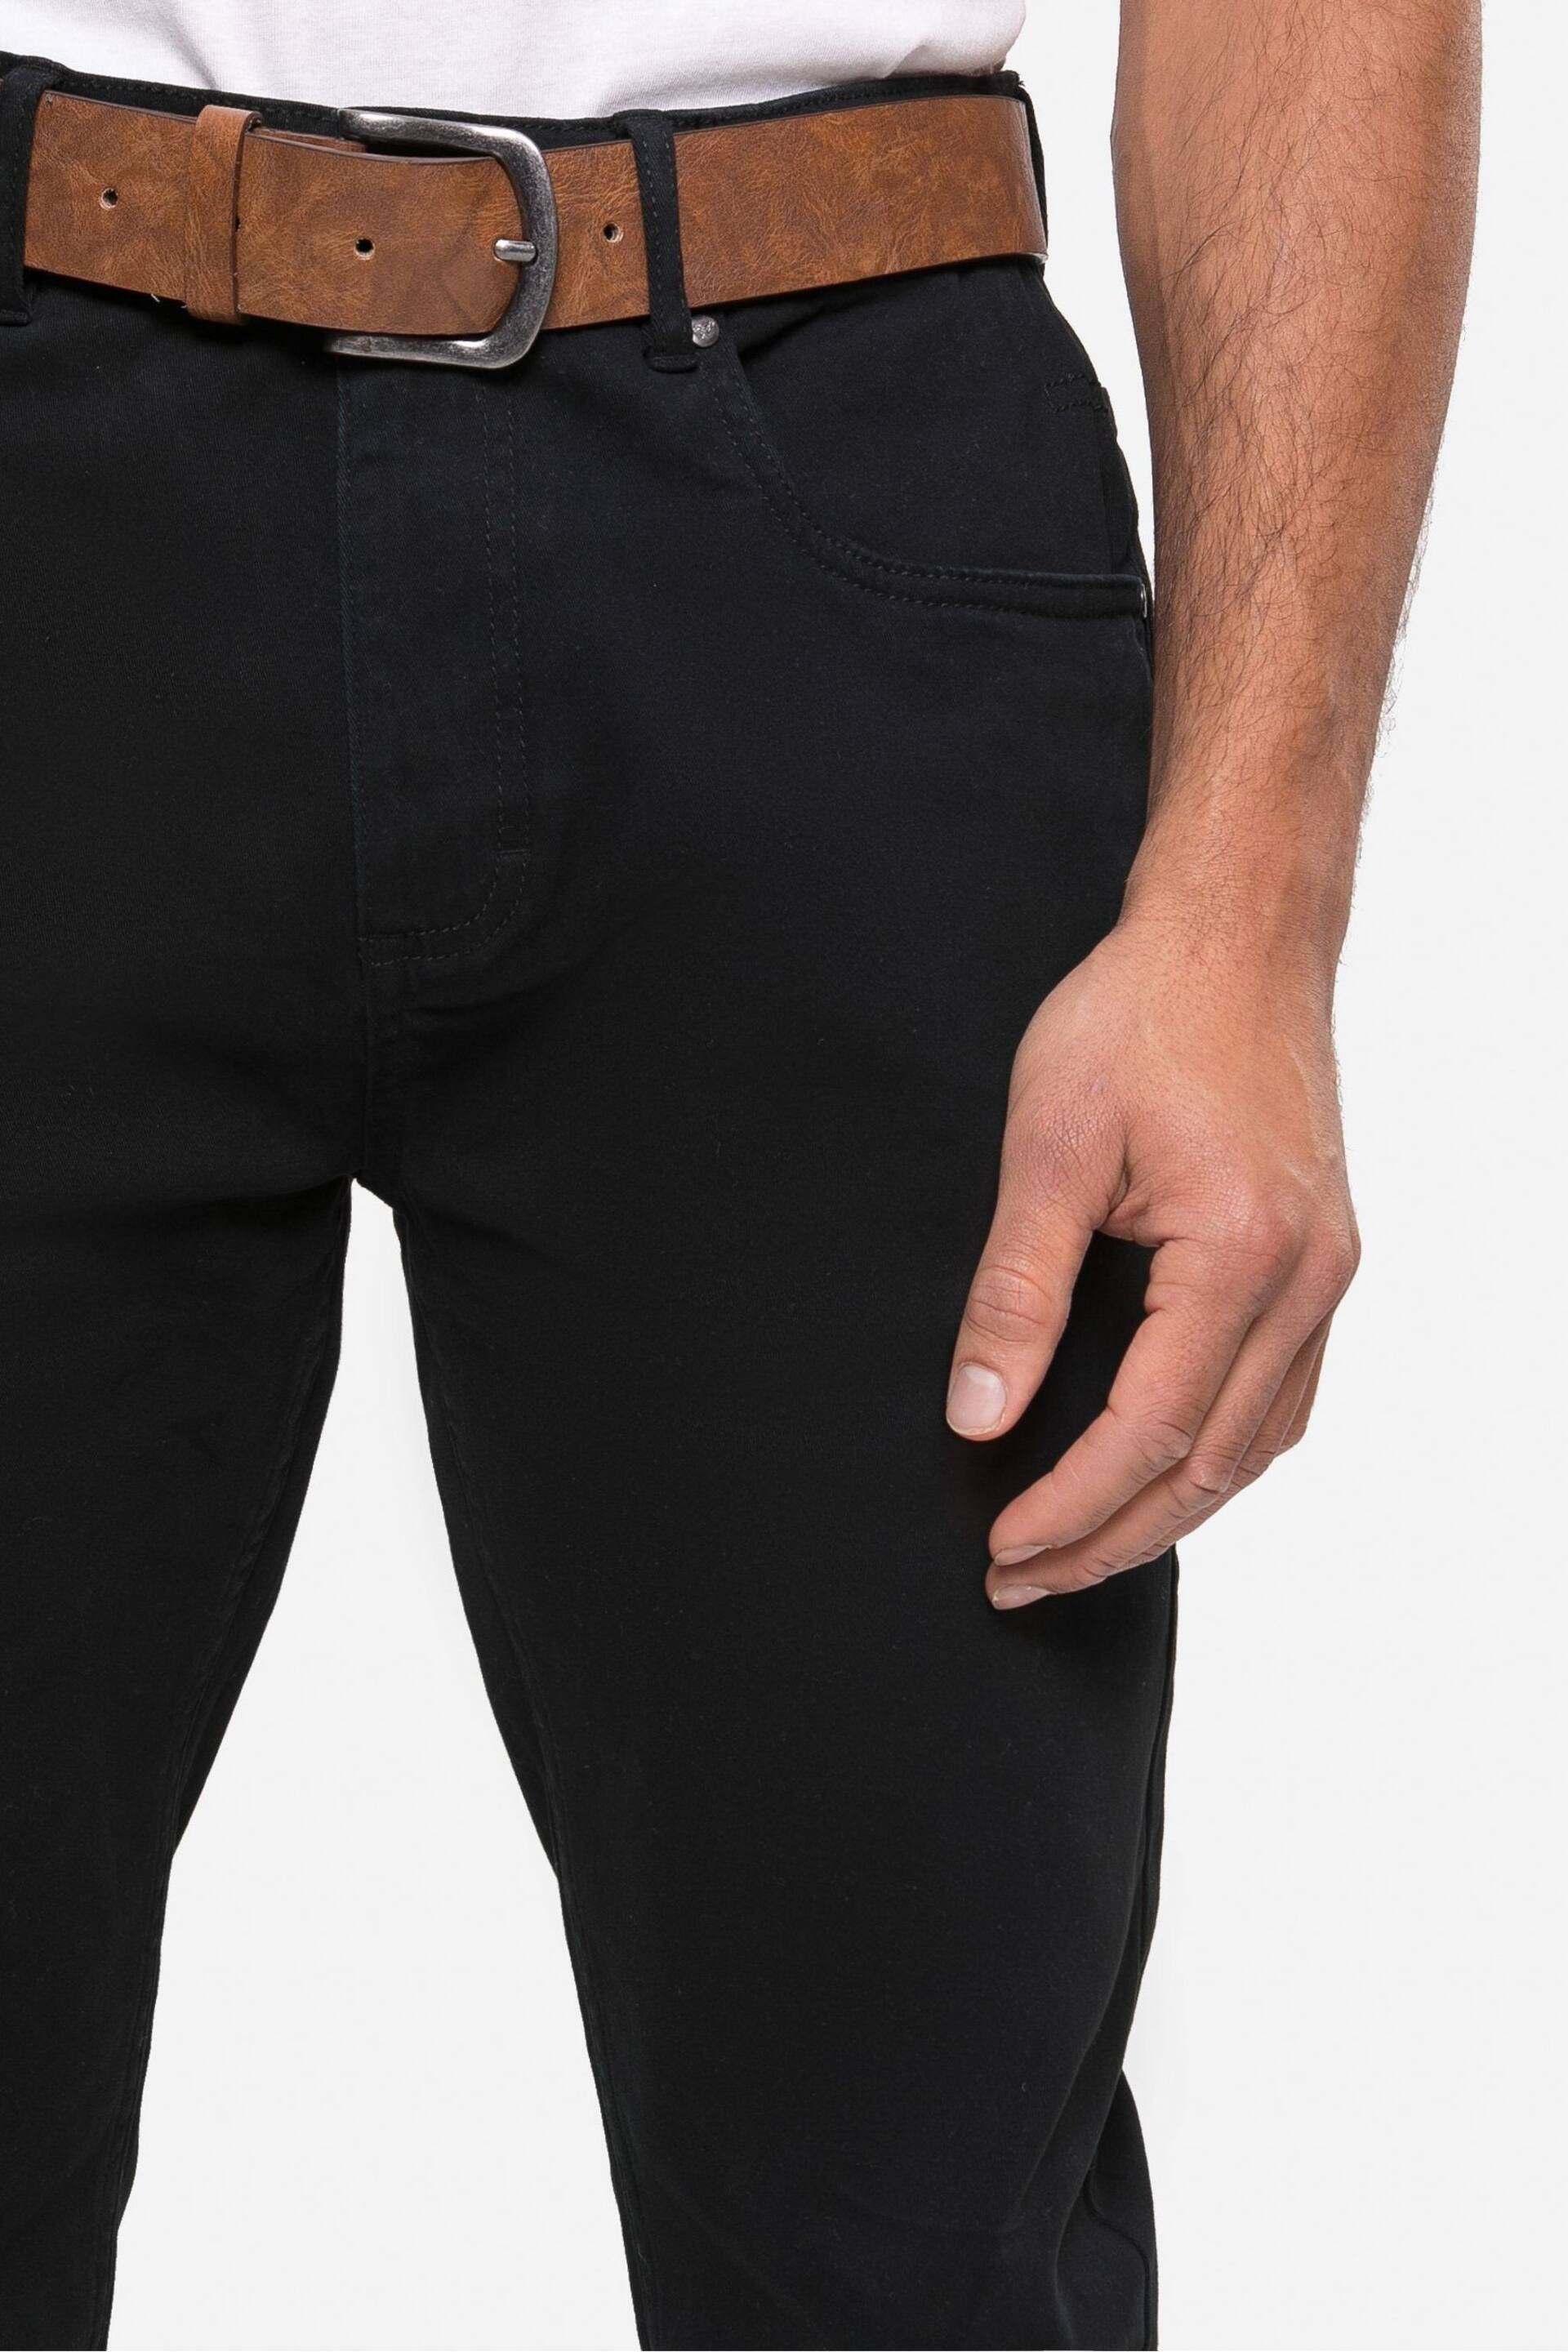 Threadbare Black Belted Stretch Chino Trousers - Image 4 of 4